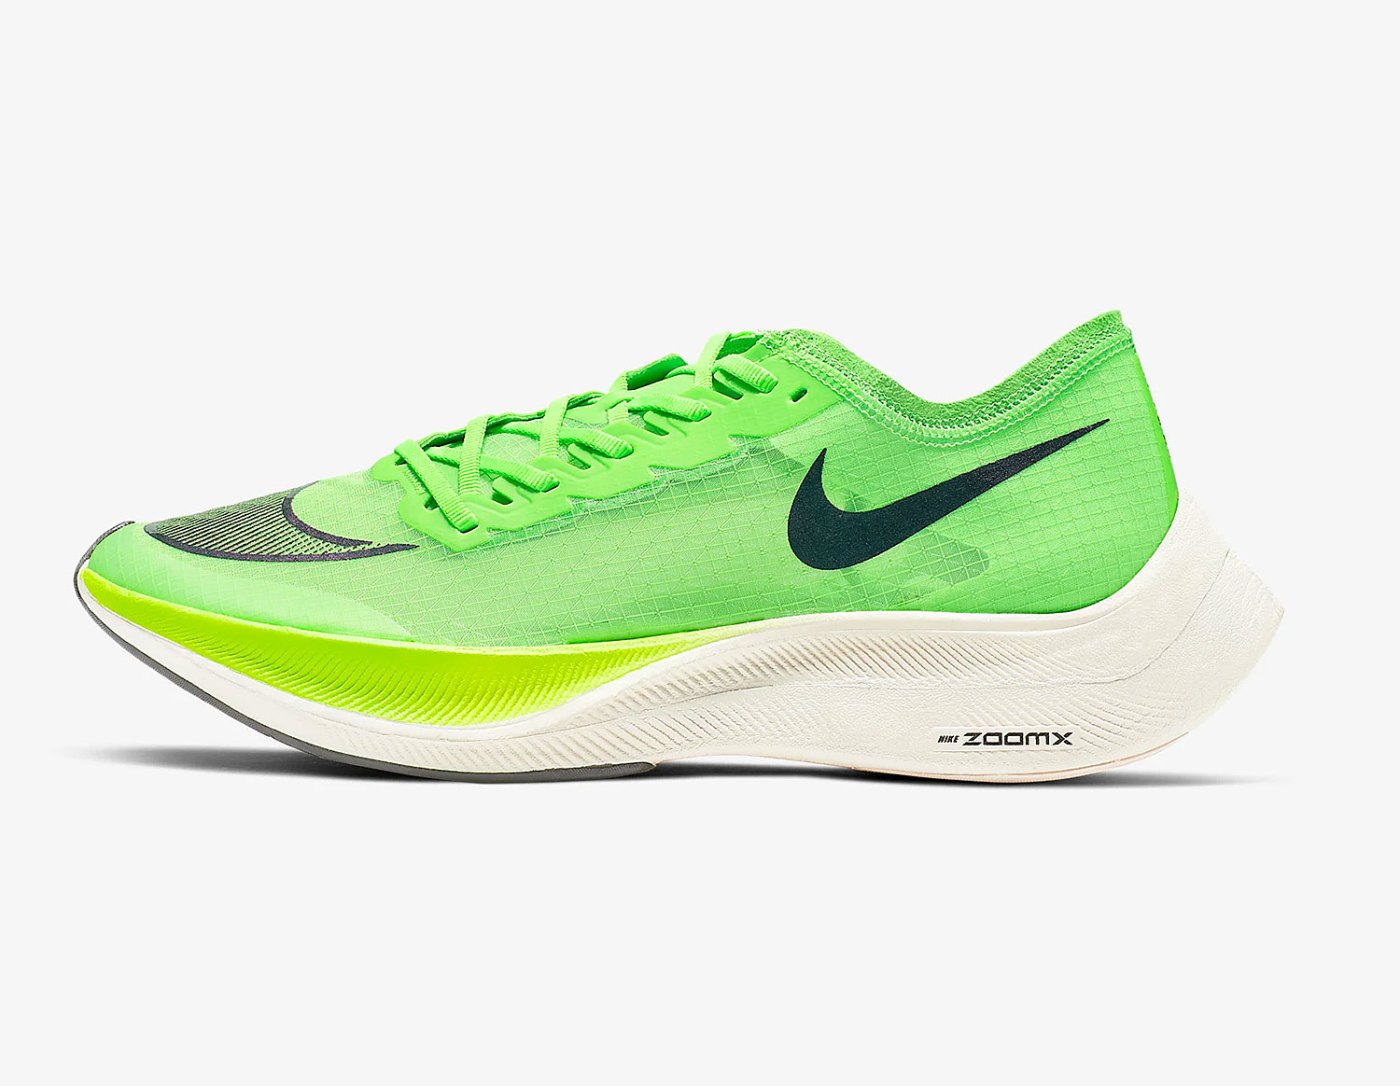 Nike Vaporfly Marathon Sneakers Cause Controversy: Details | Us Weekly